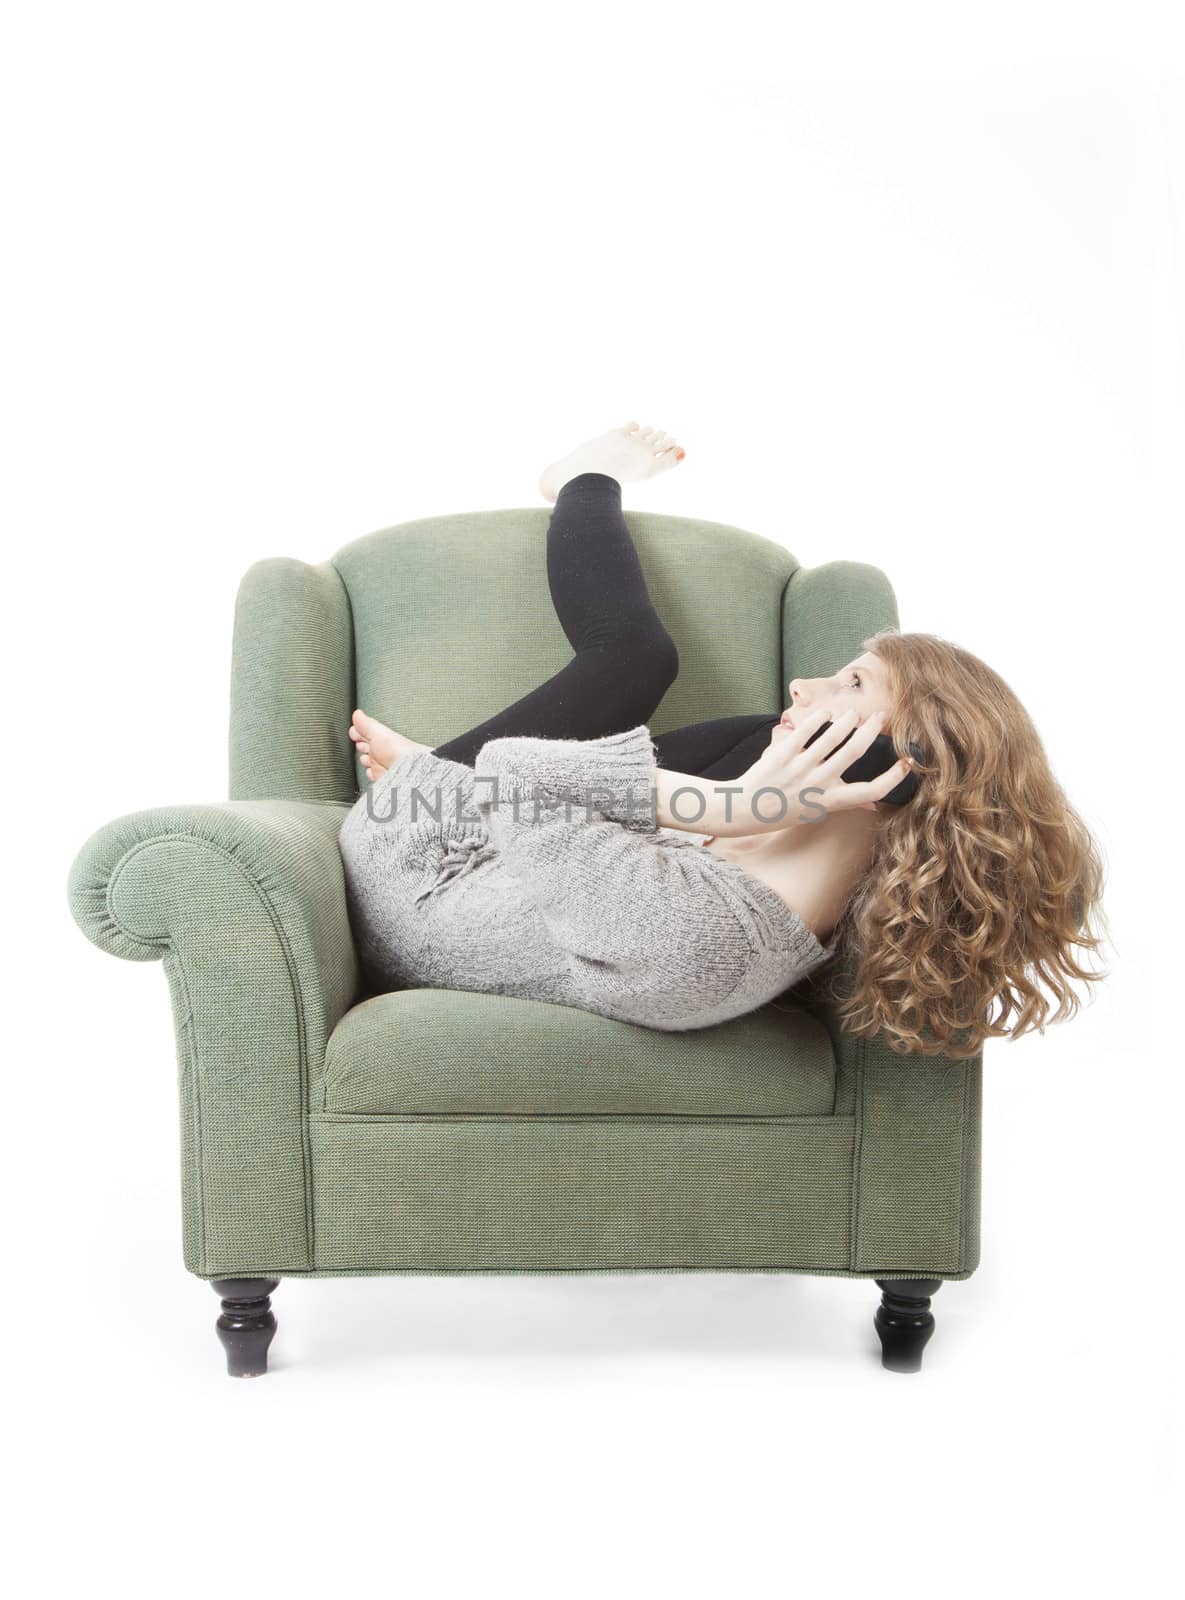 young pretty woman on the phone in armchair against white background